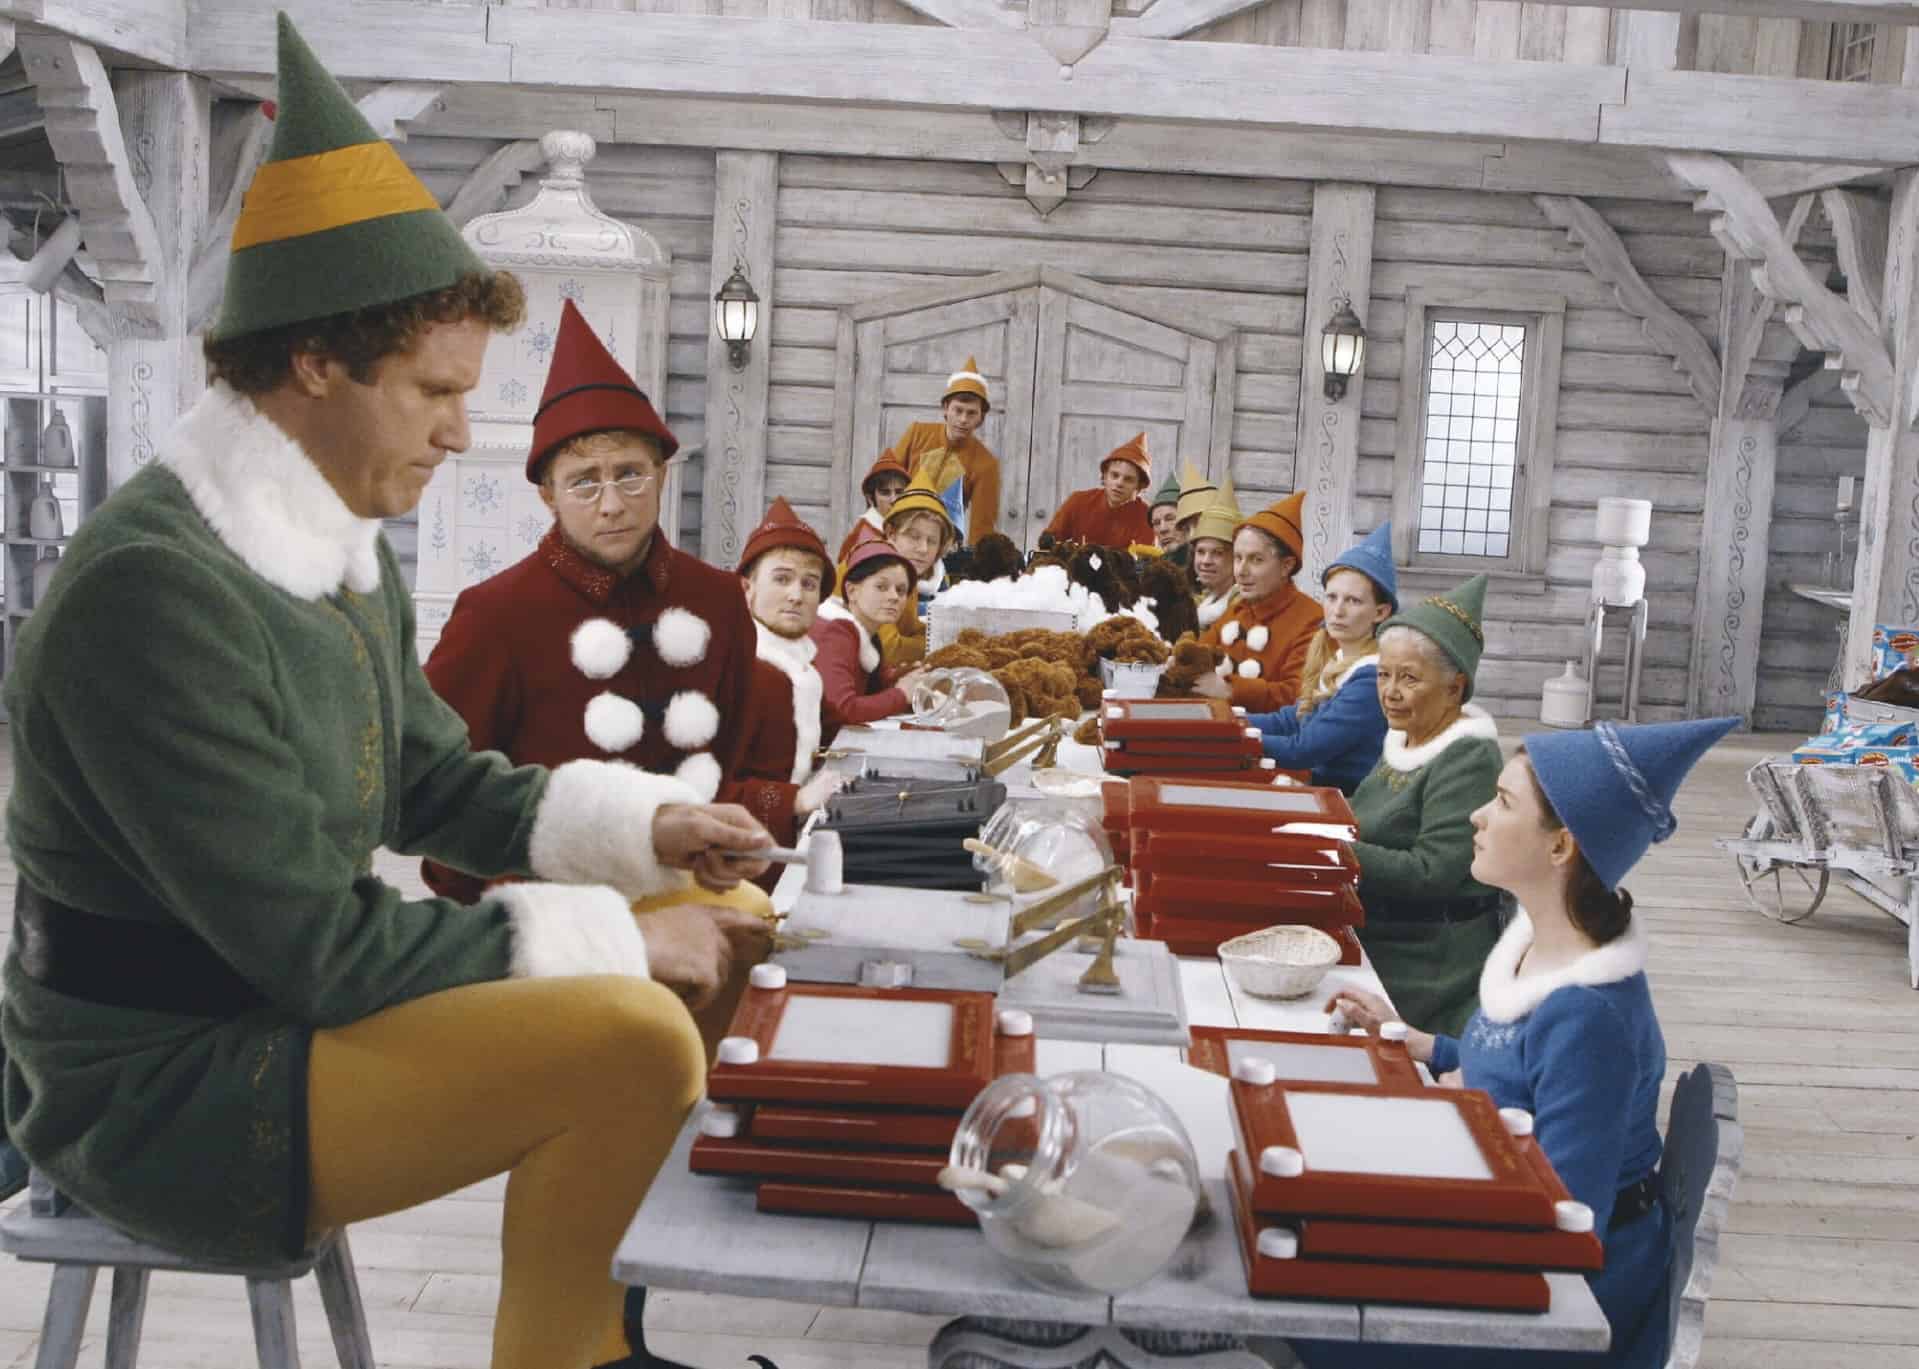 Buddy towers over the other elves in Santa’s Workshop